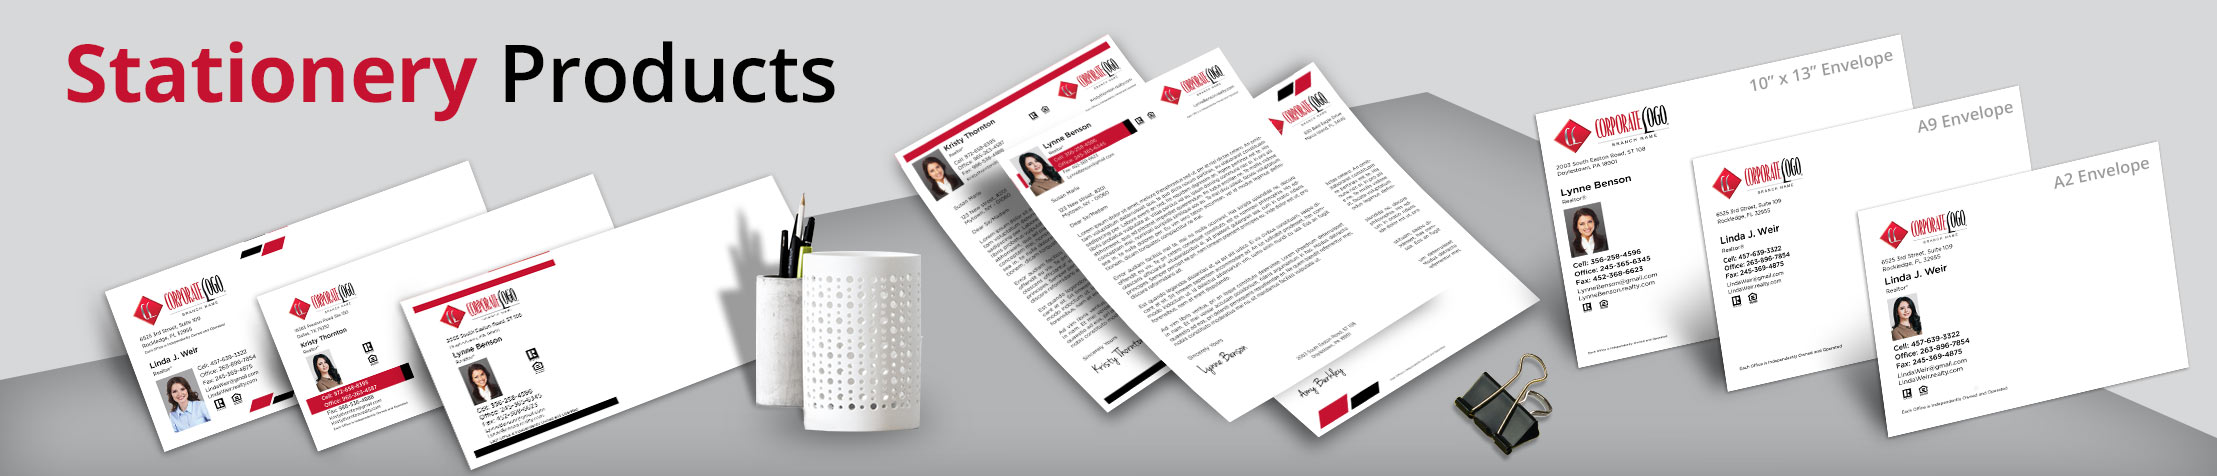 HomeSmart Real Estate Stationery Products - Custom Letterhead & Envelopes Stationery Products for Realtors | BestPrintBuy.com